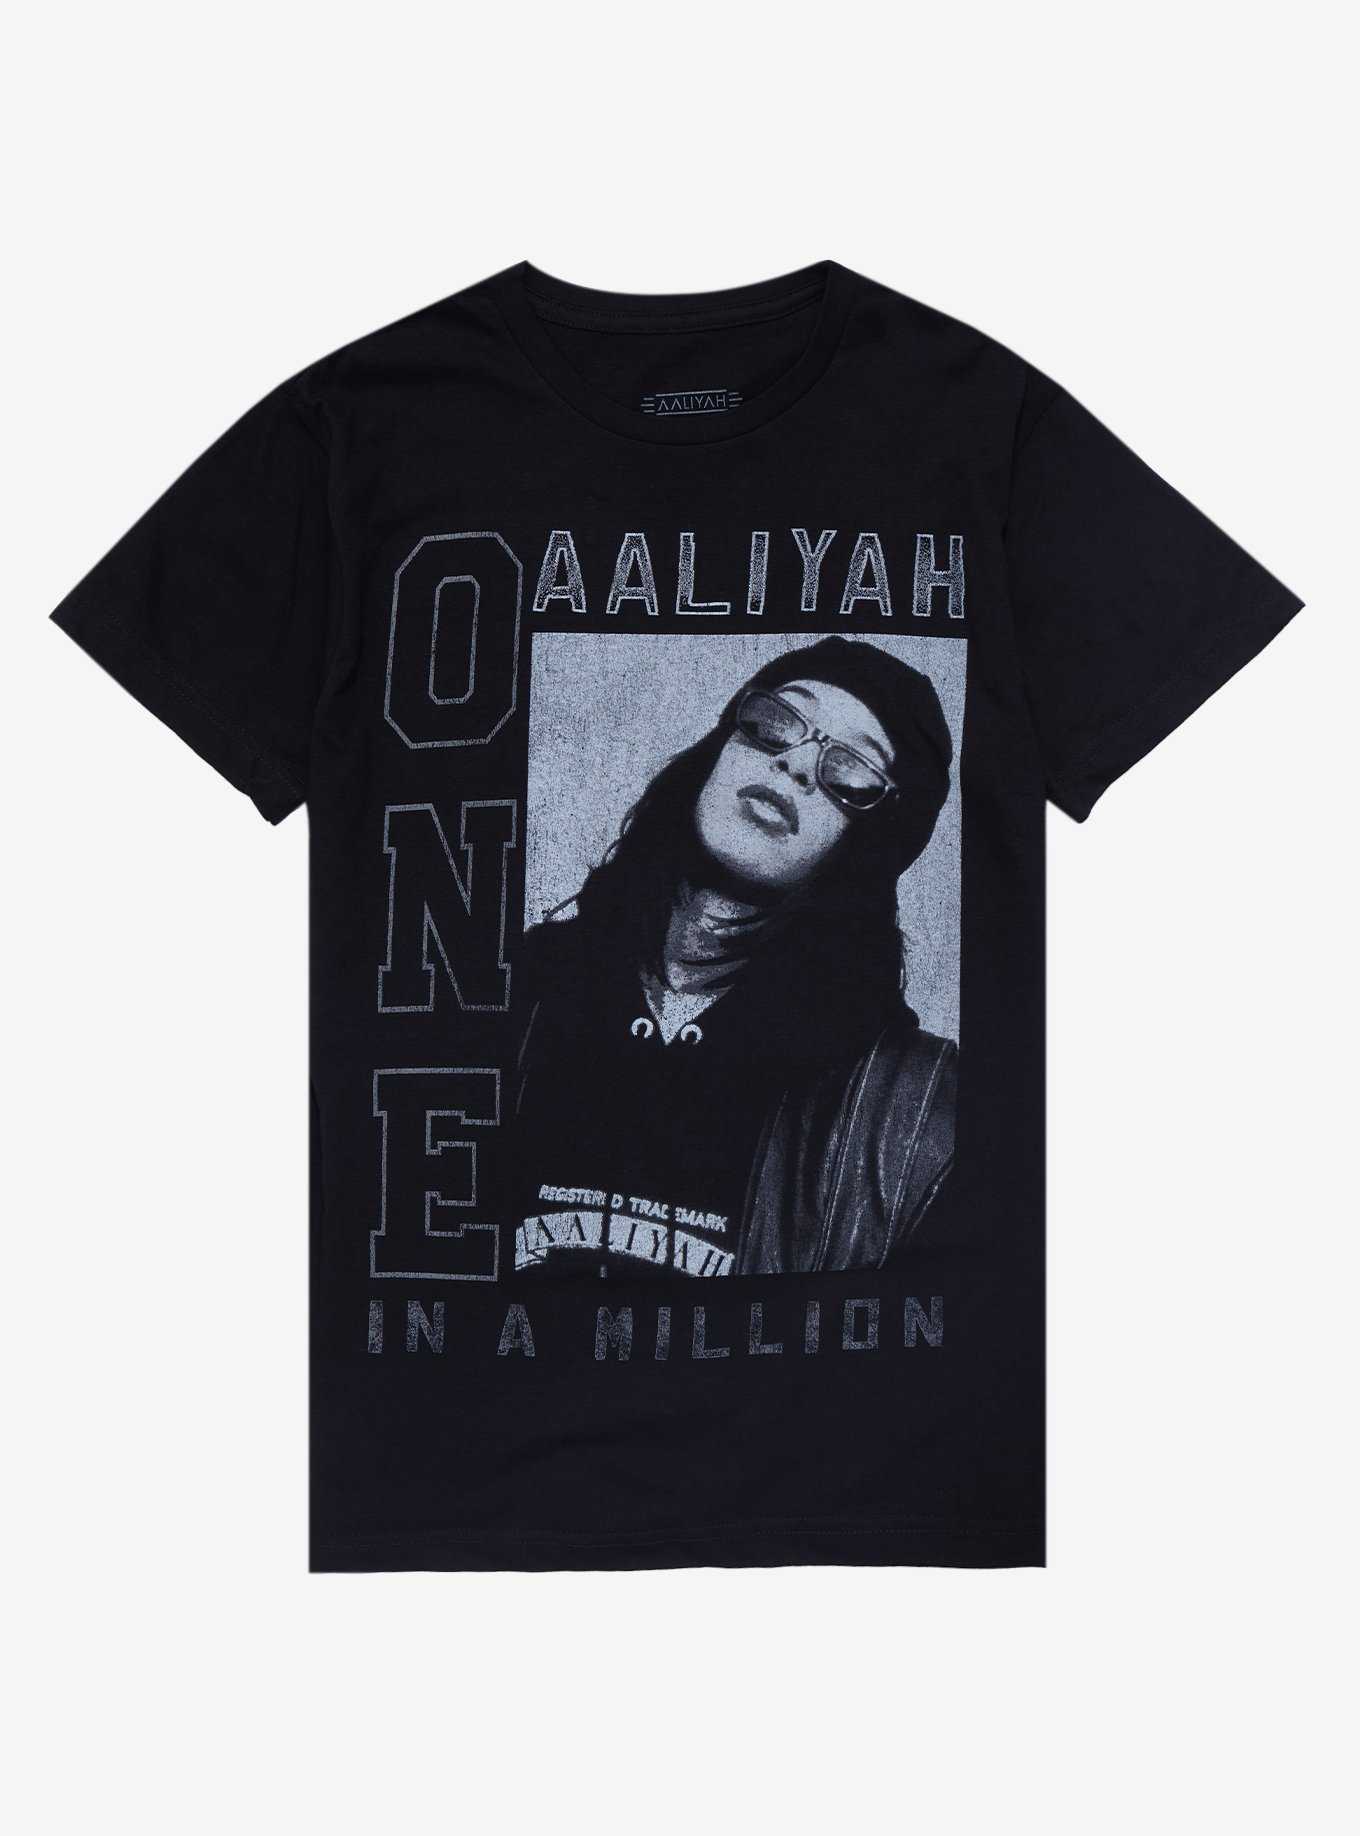 Aaliyah One In A Million Portrait T-Shirt, , hi-res